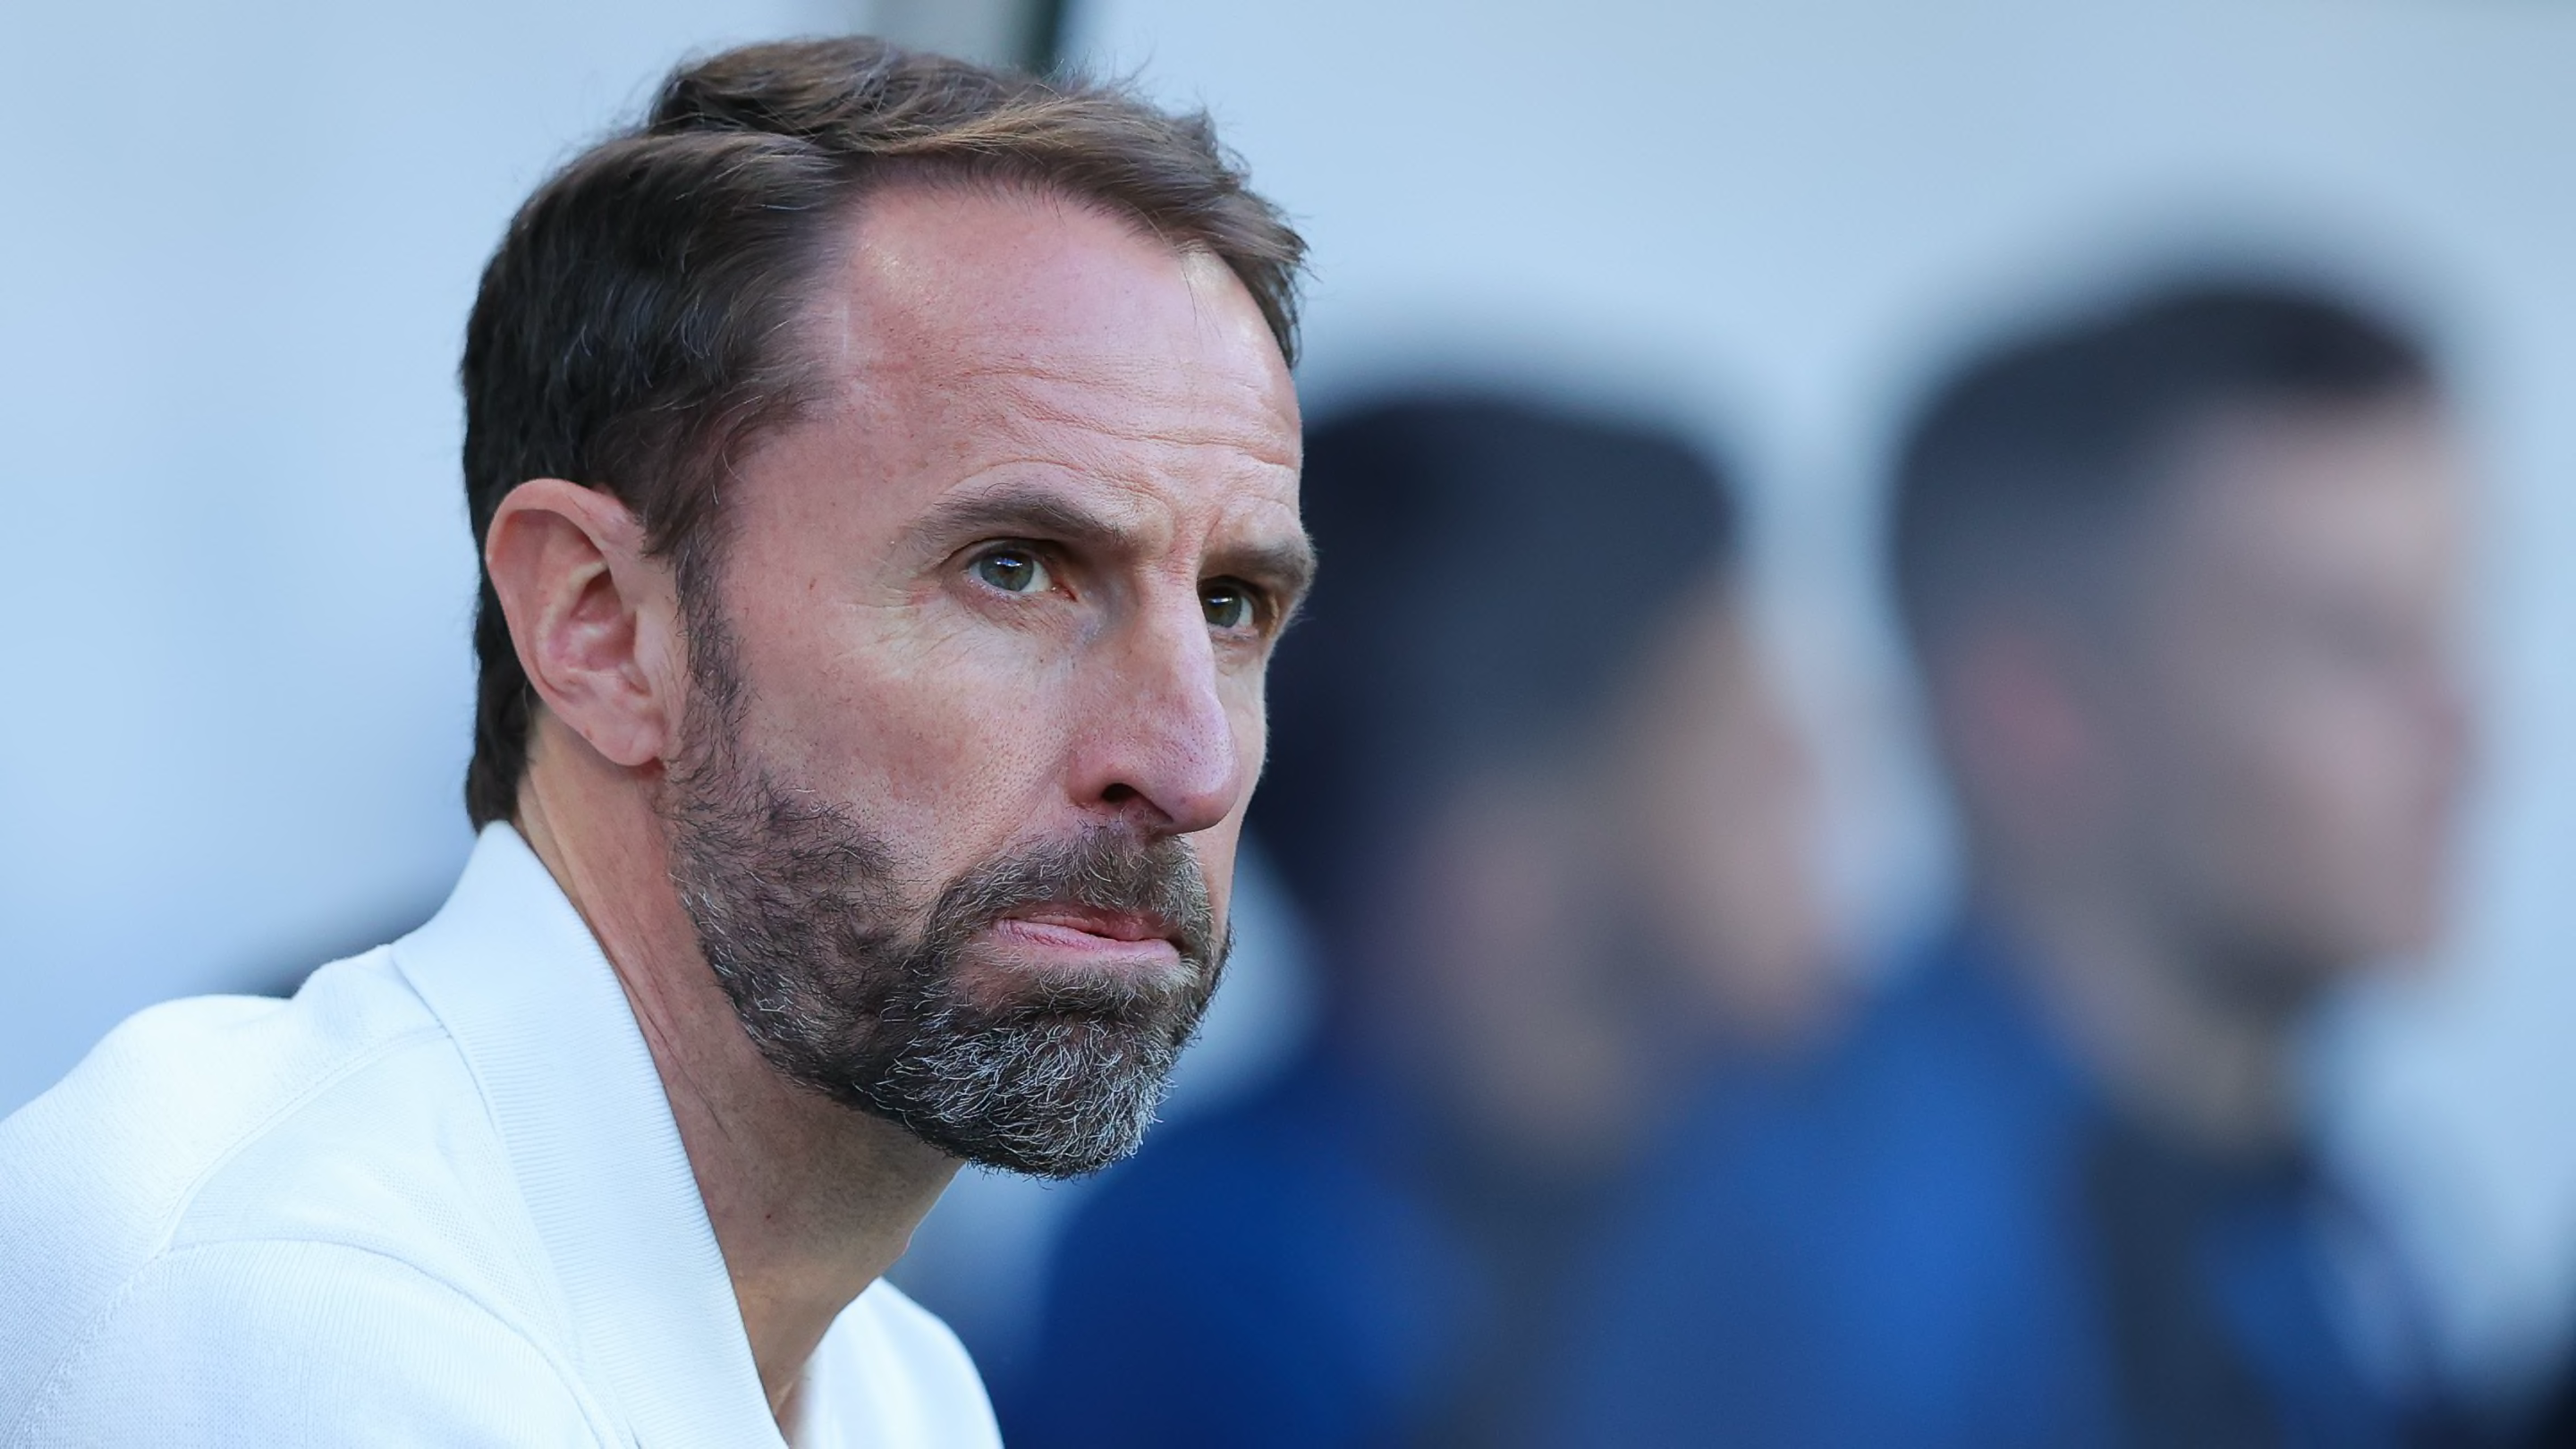 The 7 players cut from England’s Euro 2024 campaign - right or wrong decision?